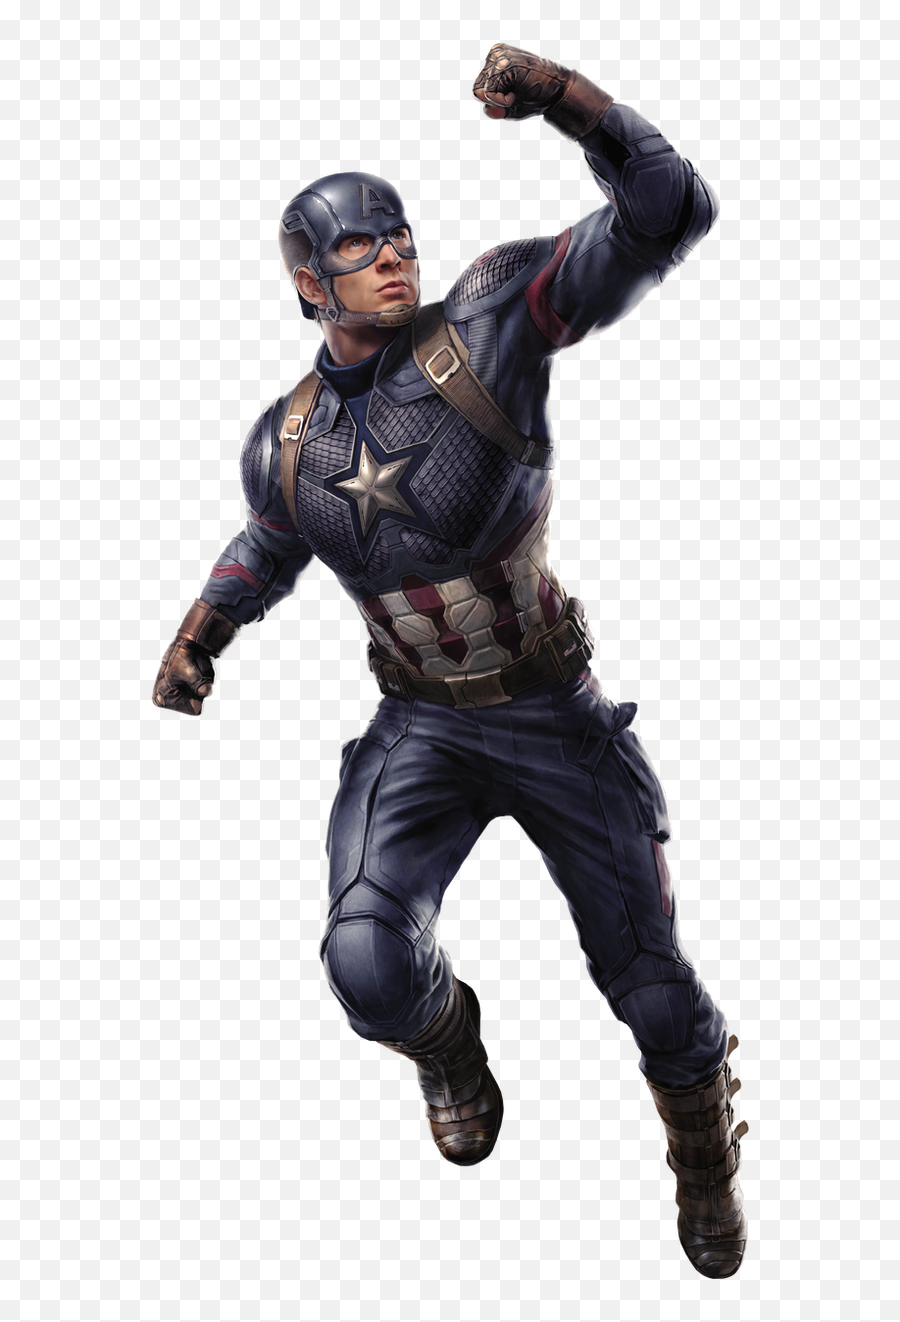 What Is The Extent Of Captain Americau0027s Strength - Quora Captain America Mcu Png,Capitan America Png